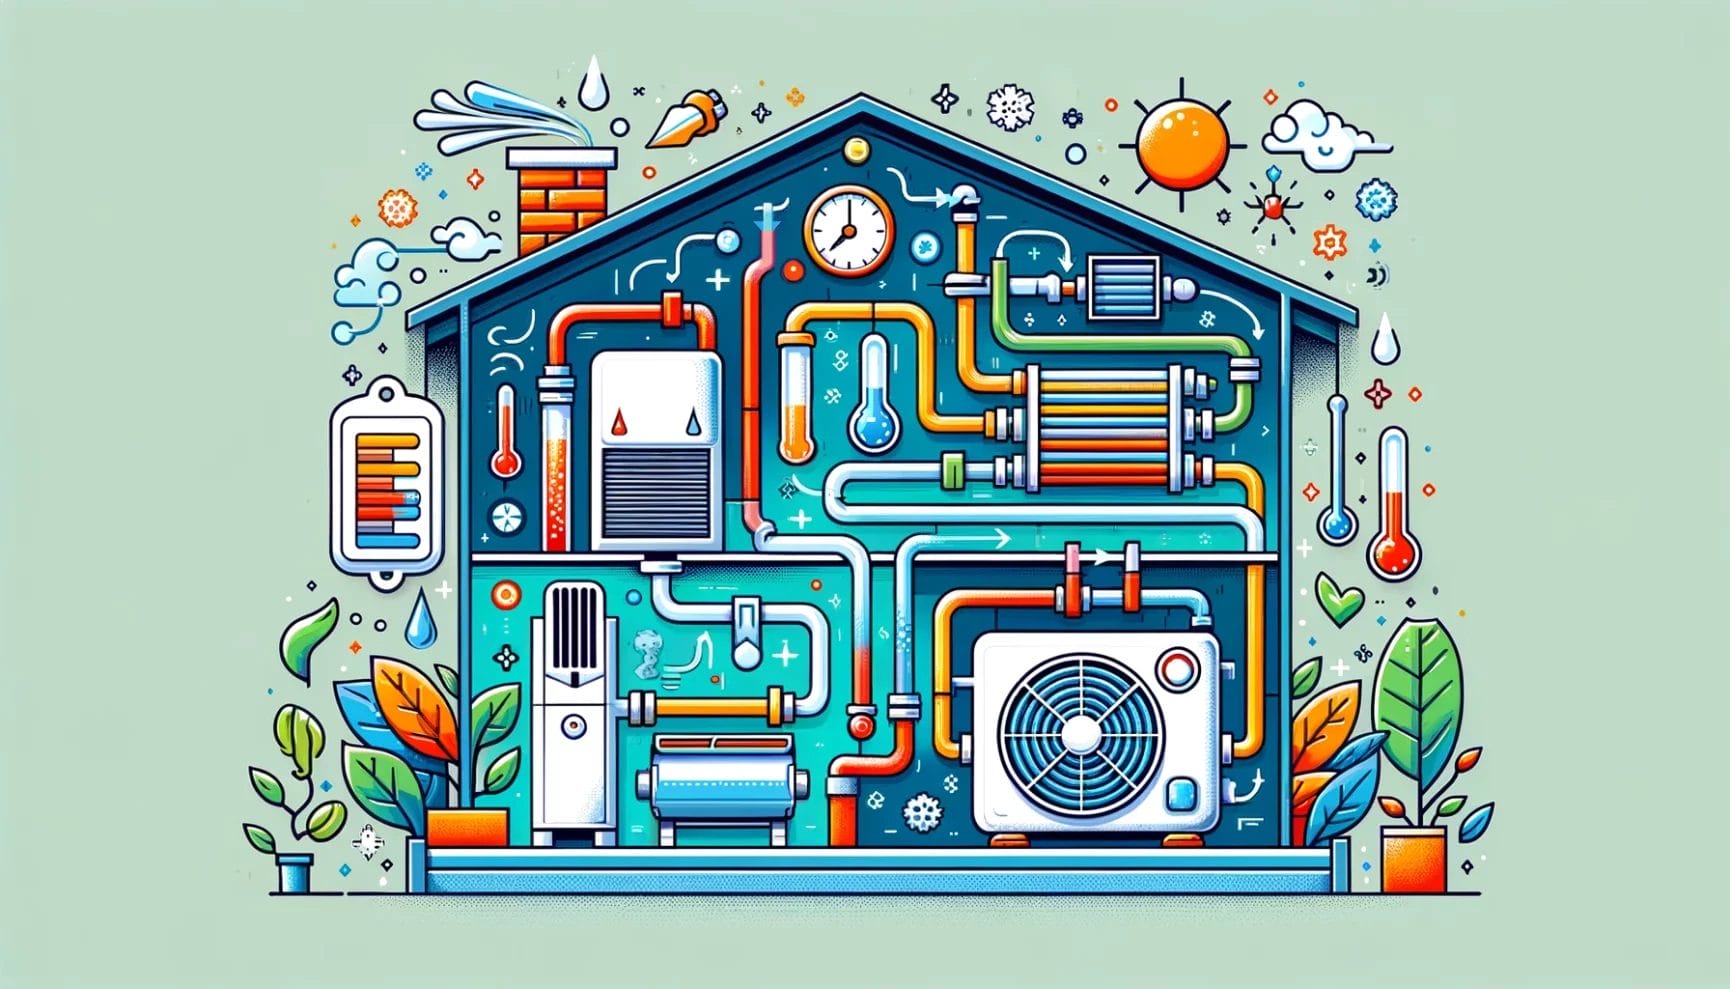 Illustration of a stylized house with visible heating, ventilation, and air conditioning systems, showcasing energy efficiency and home mechanics.